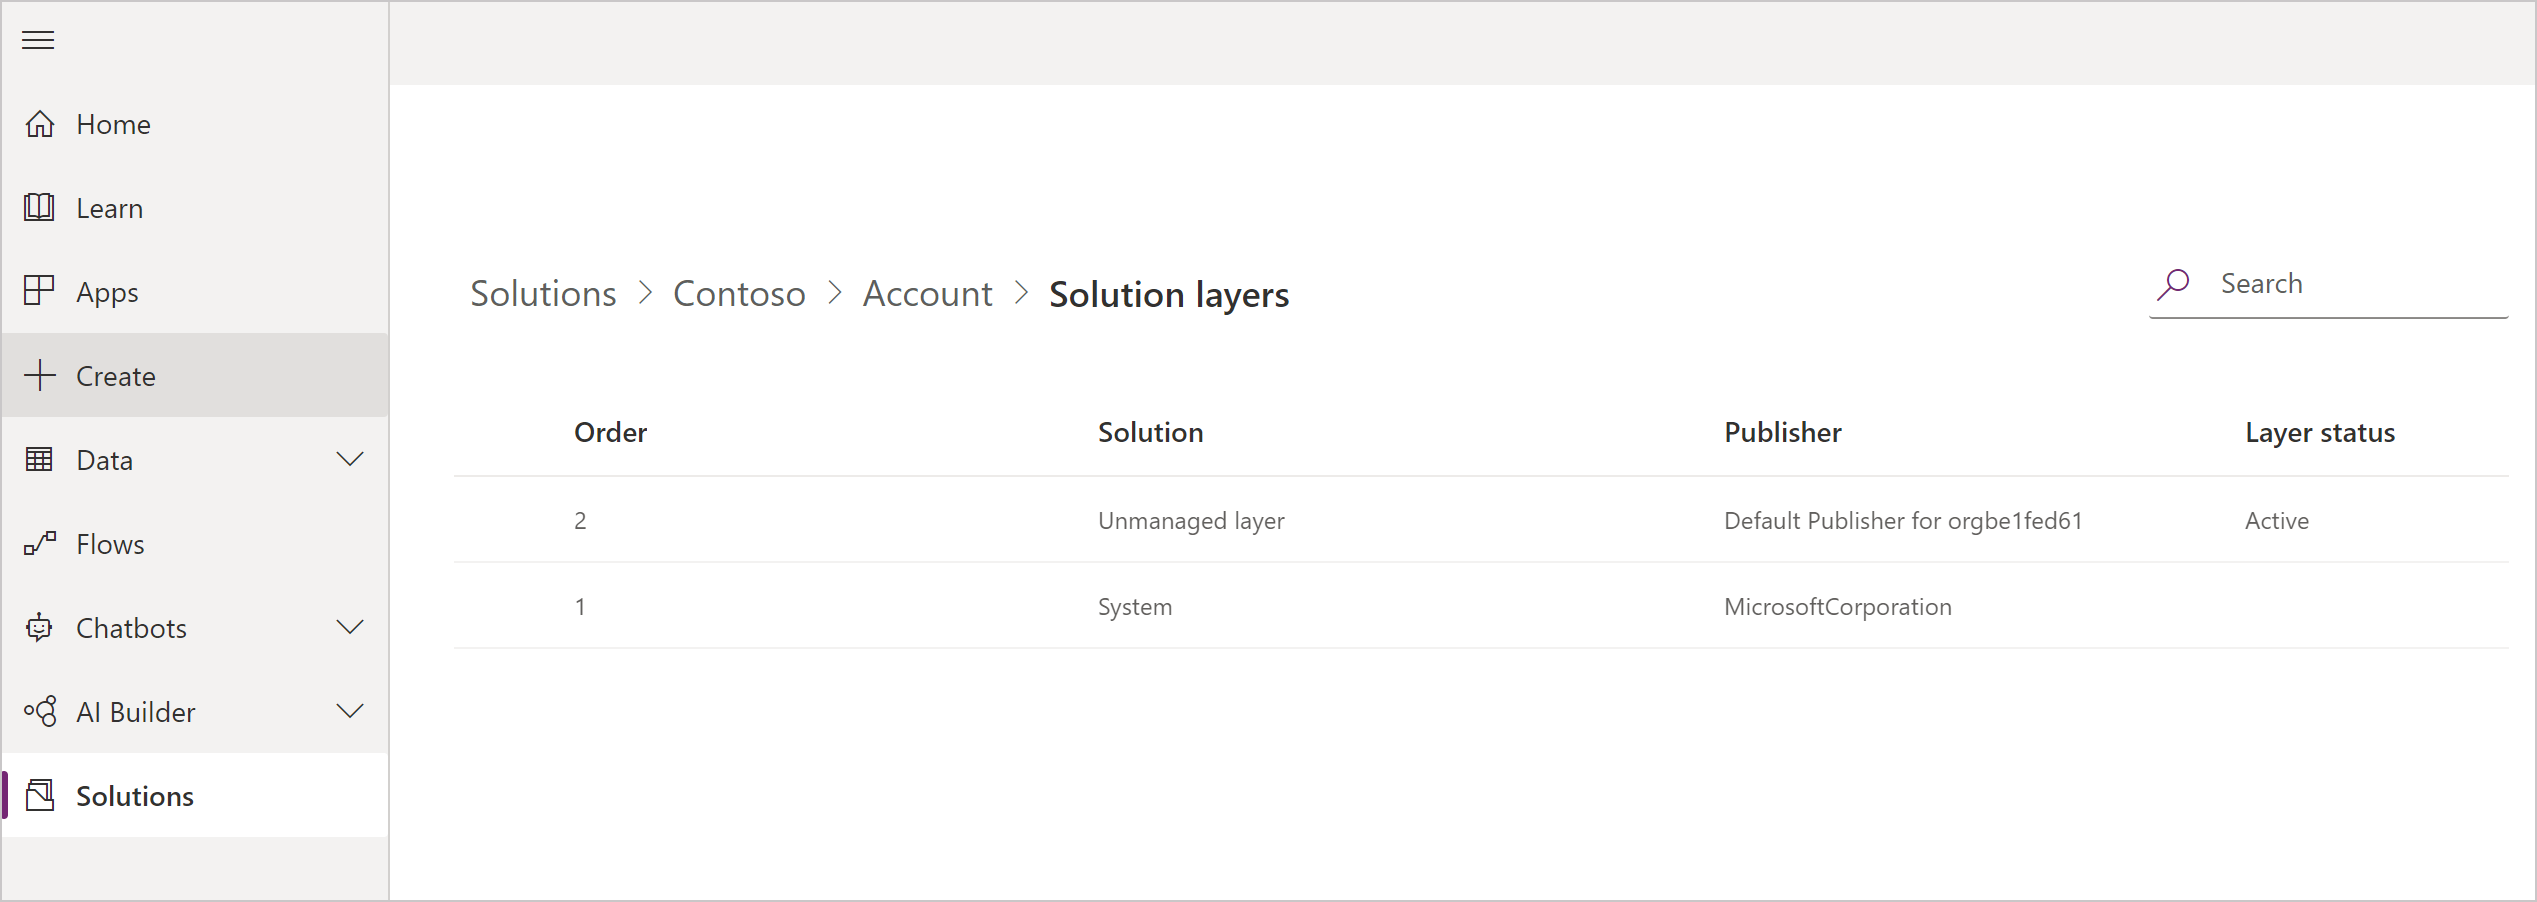 Solution layers list